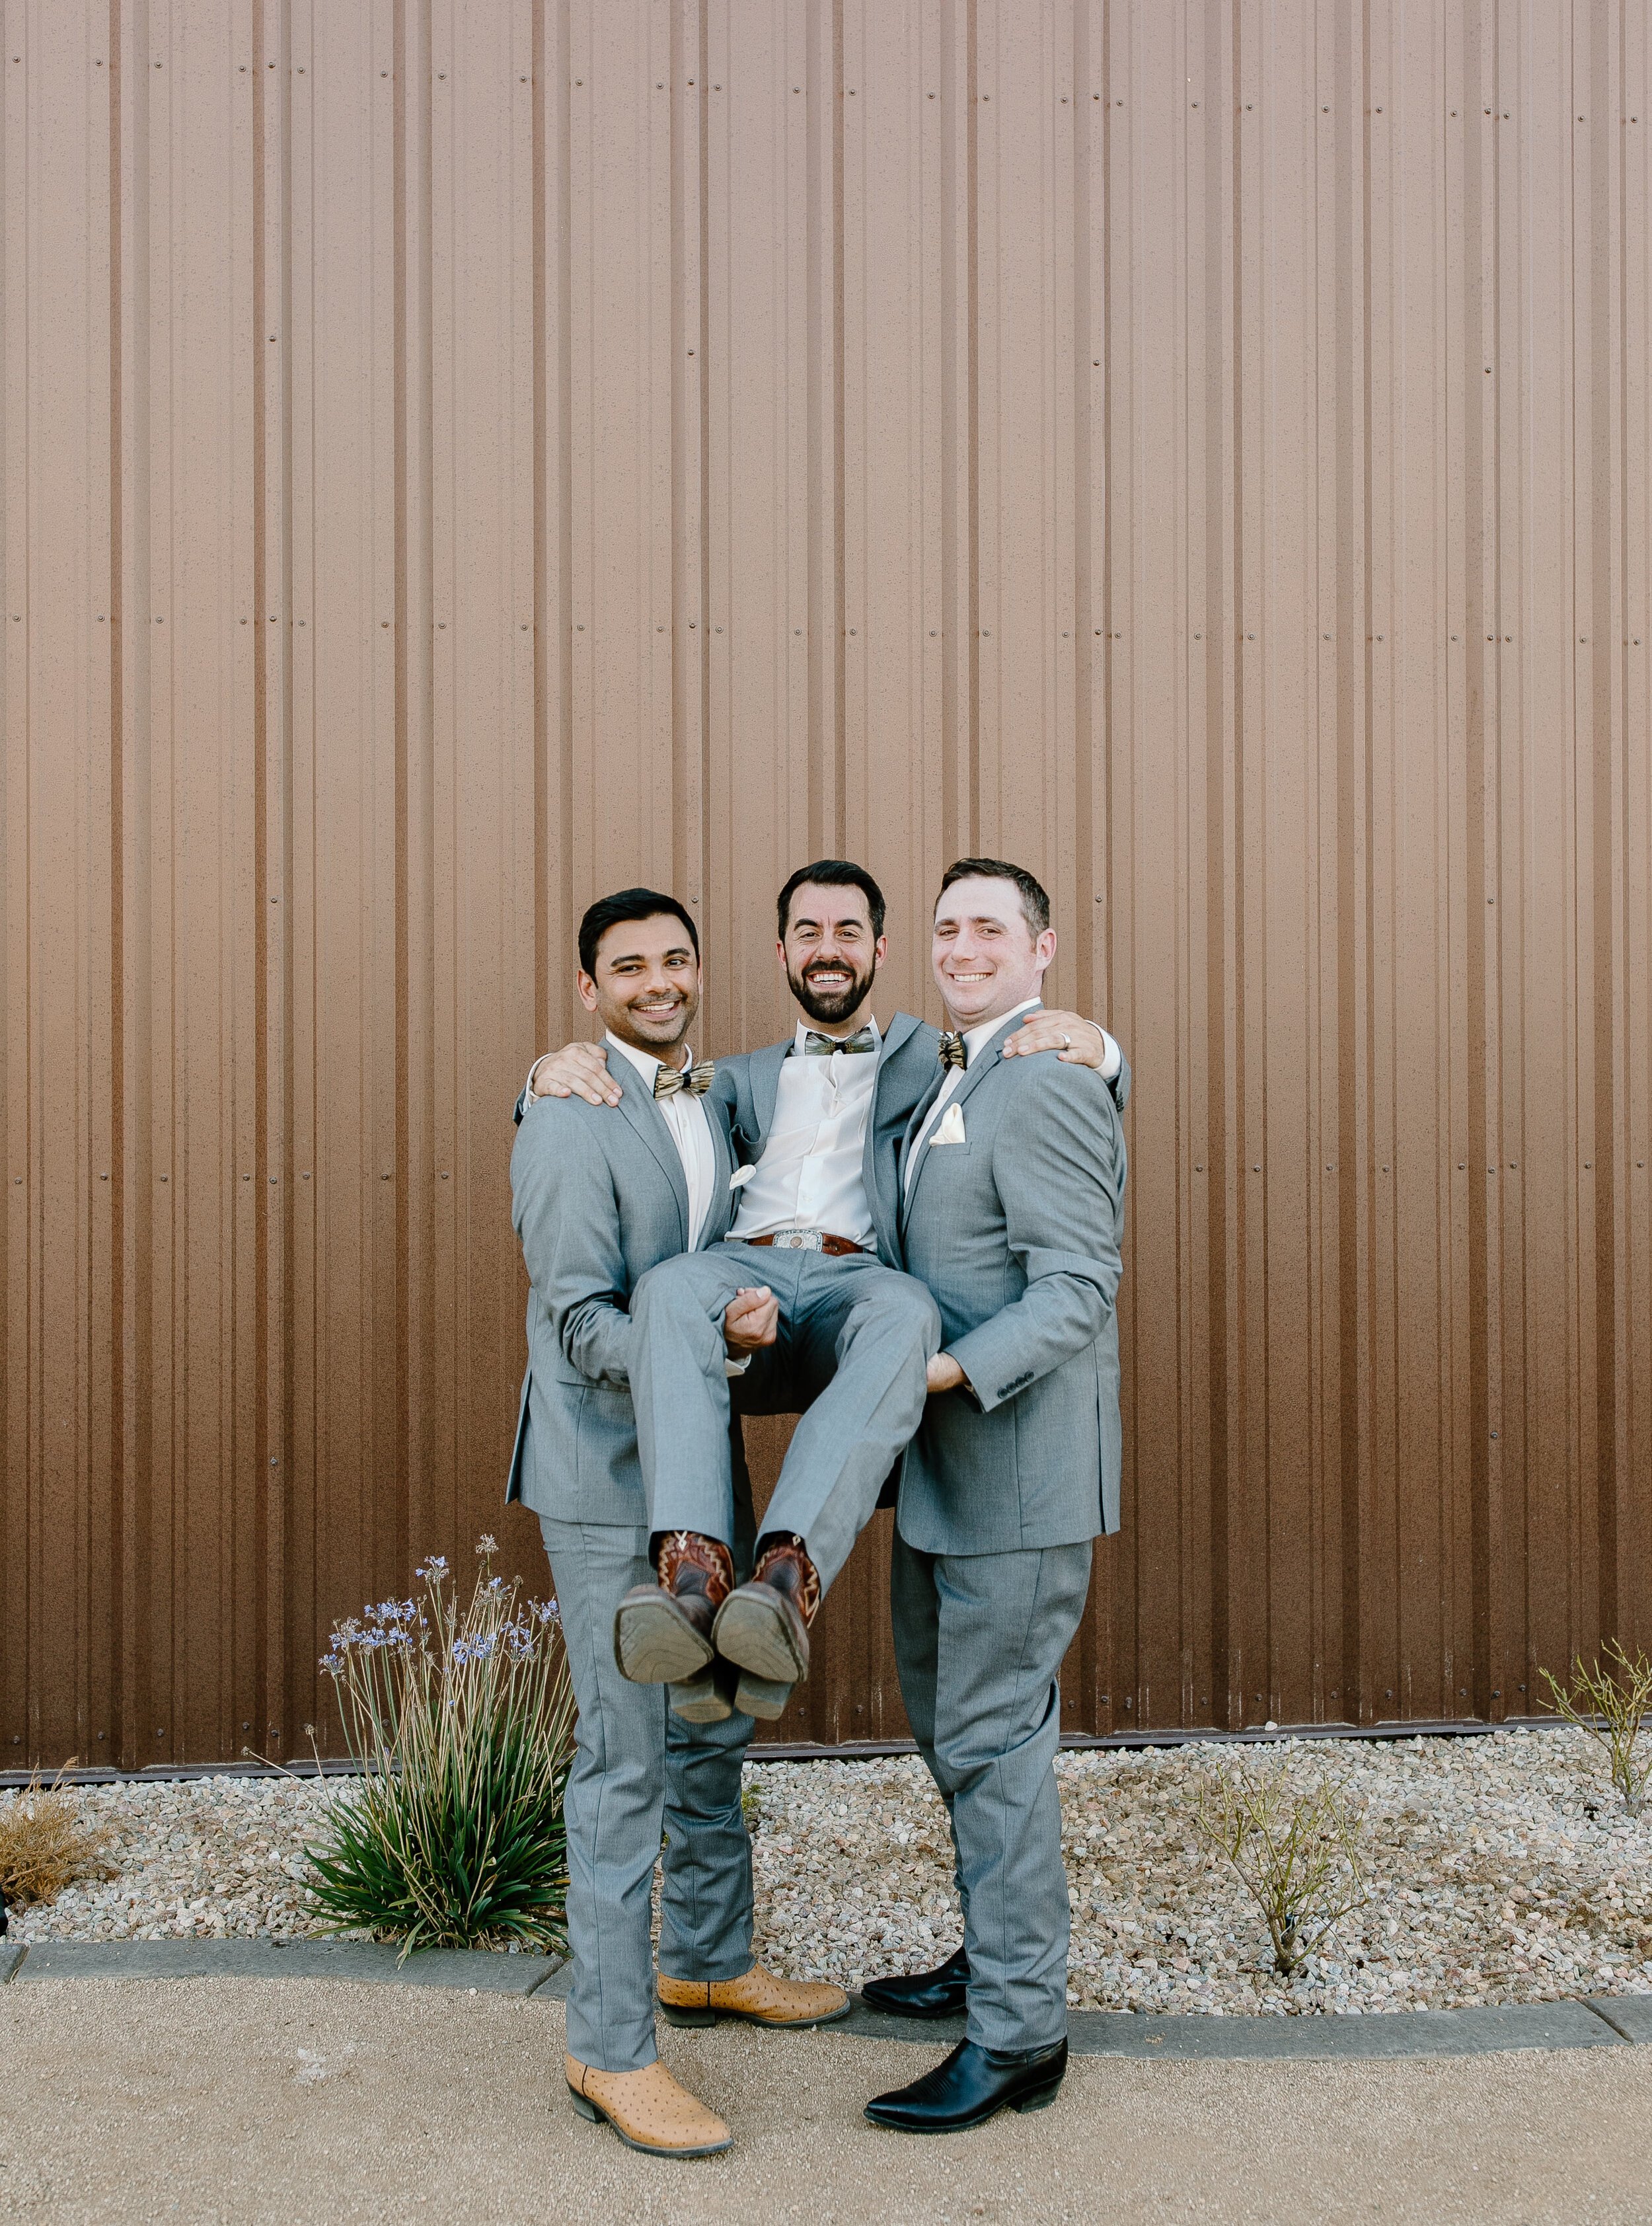 www.santabarbarawedding.com | Events by Fran | Becca Romero Creative | Unique Floral Designs | Groomsmen Holding Up the Groom